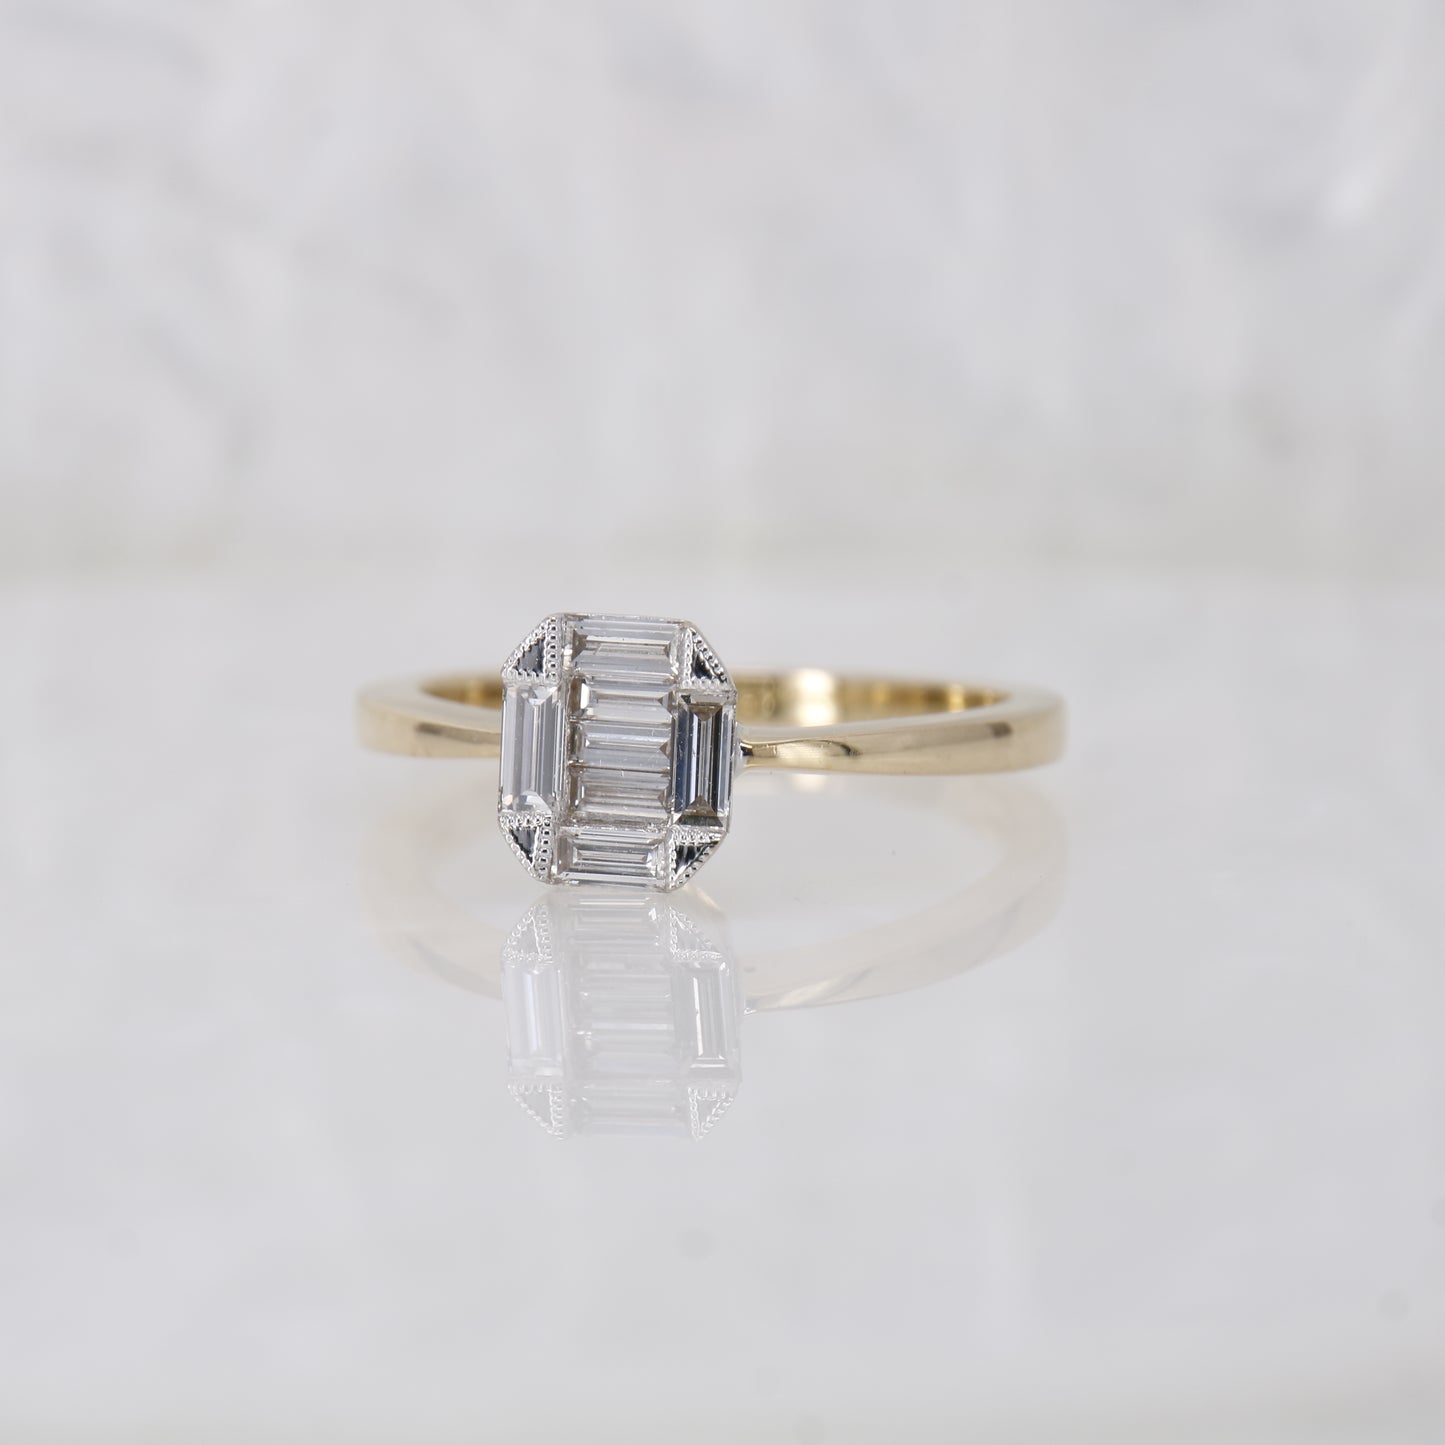 Pre-Owned baguette cut diamond cluster ring, featuring 7 stunning baguette cut diamonds set in a hexagonal shape. Perfect as a vintage inspired engagement ring.